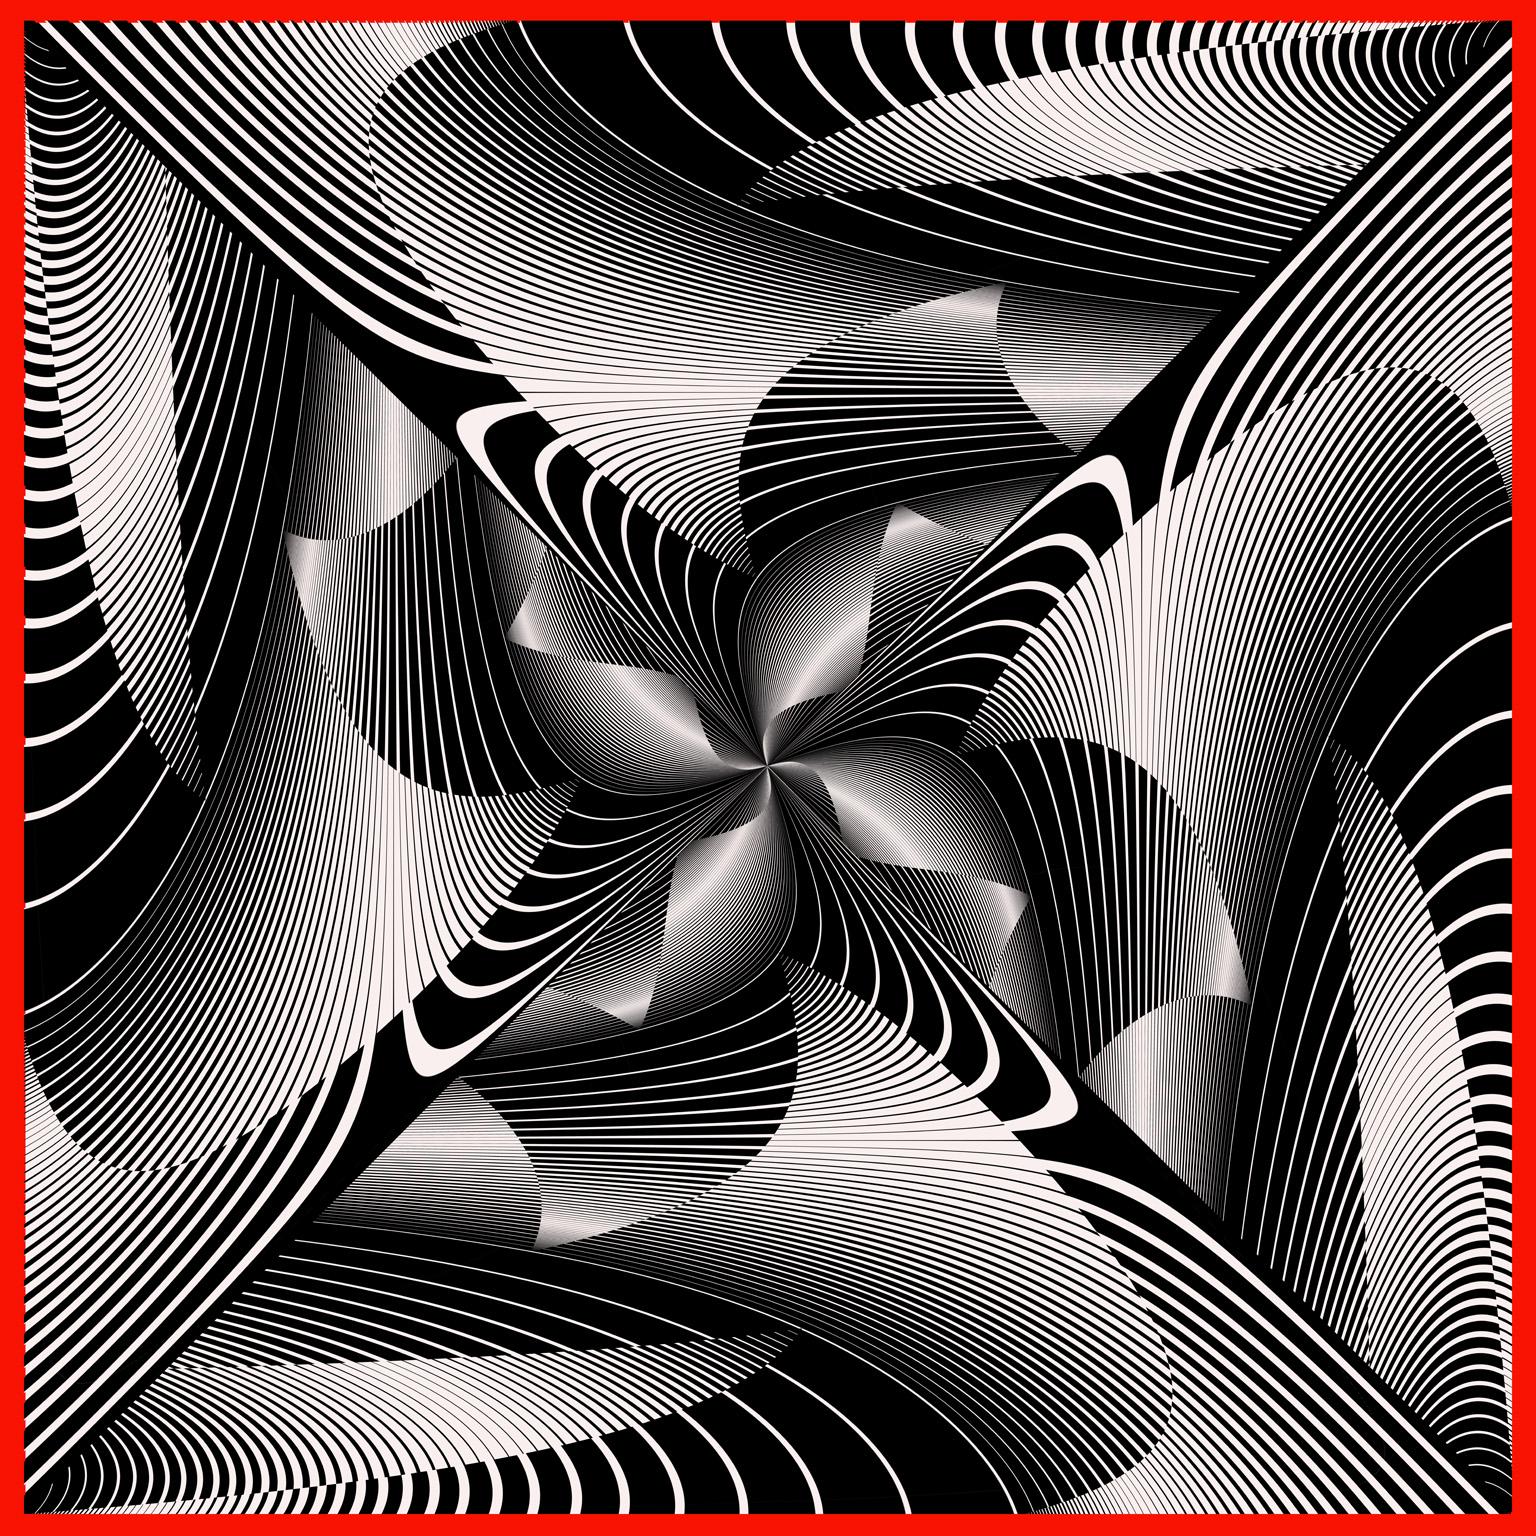 Enzo Ragazzini Abstract Photograph - Untitled - Black and White Op Art Print with Red Frame